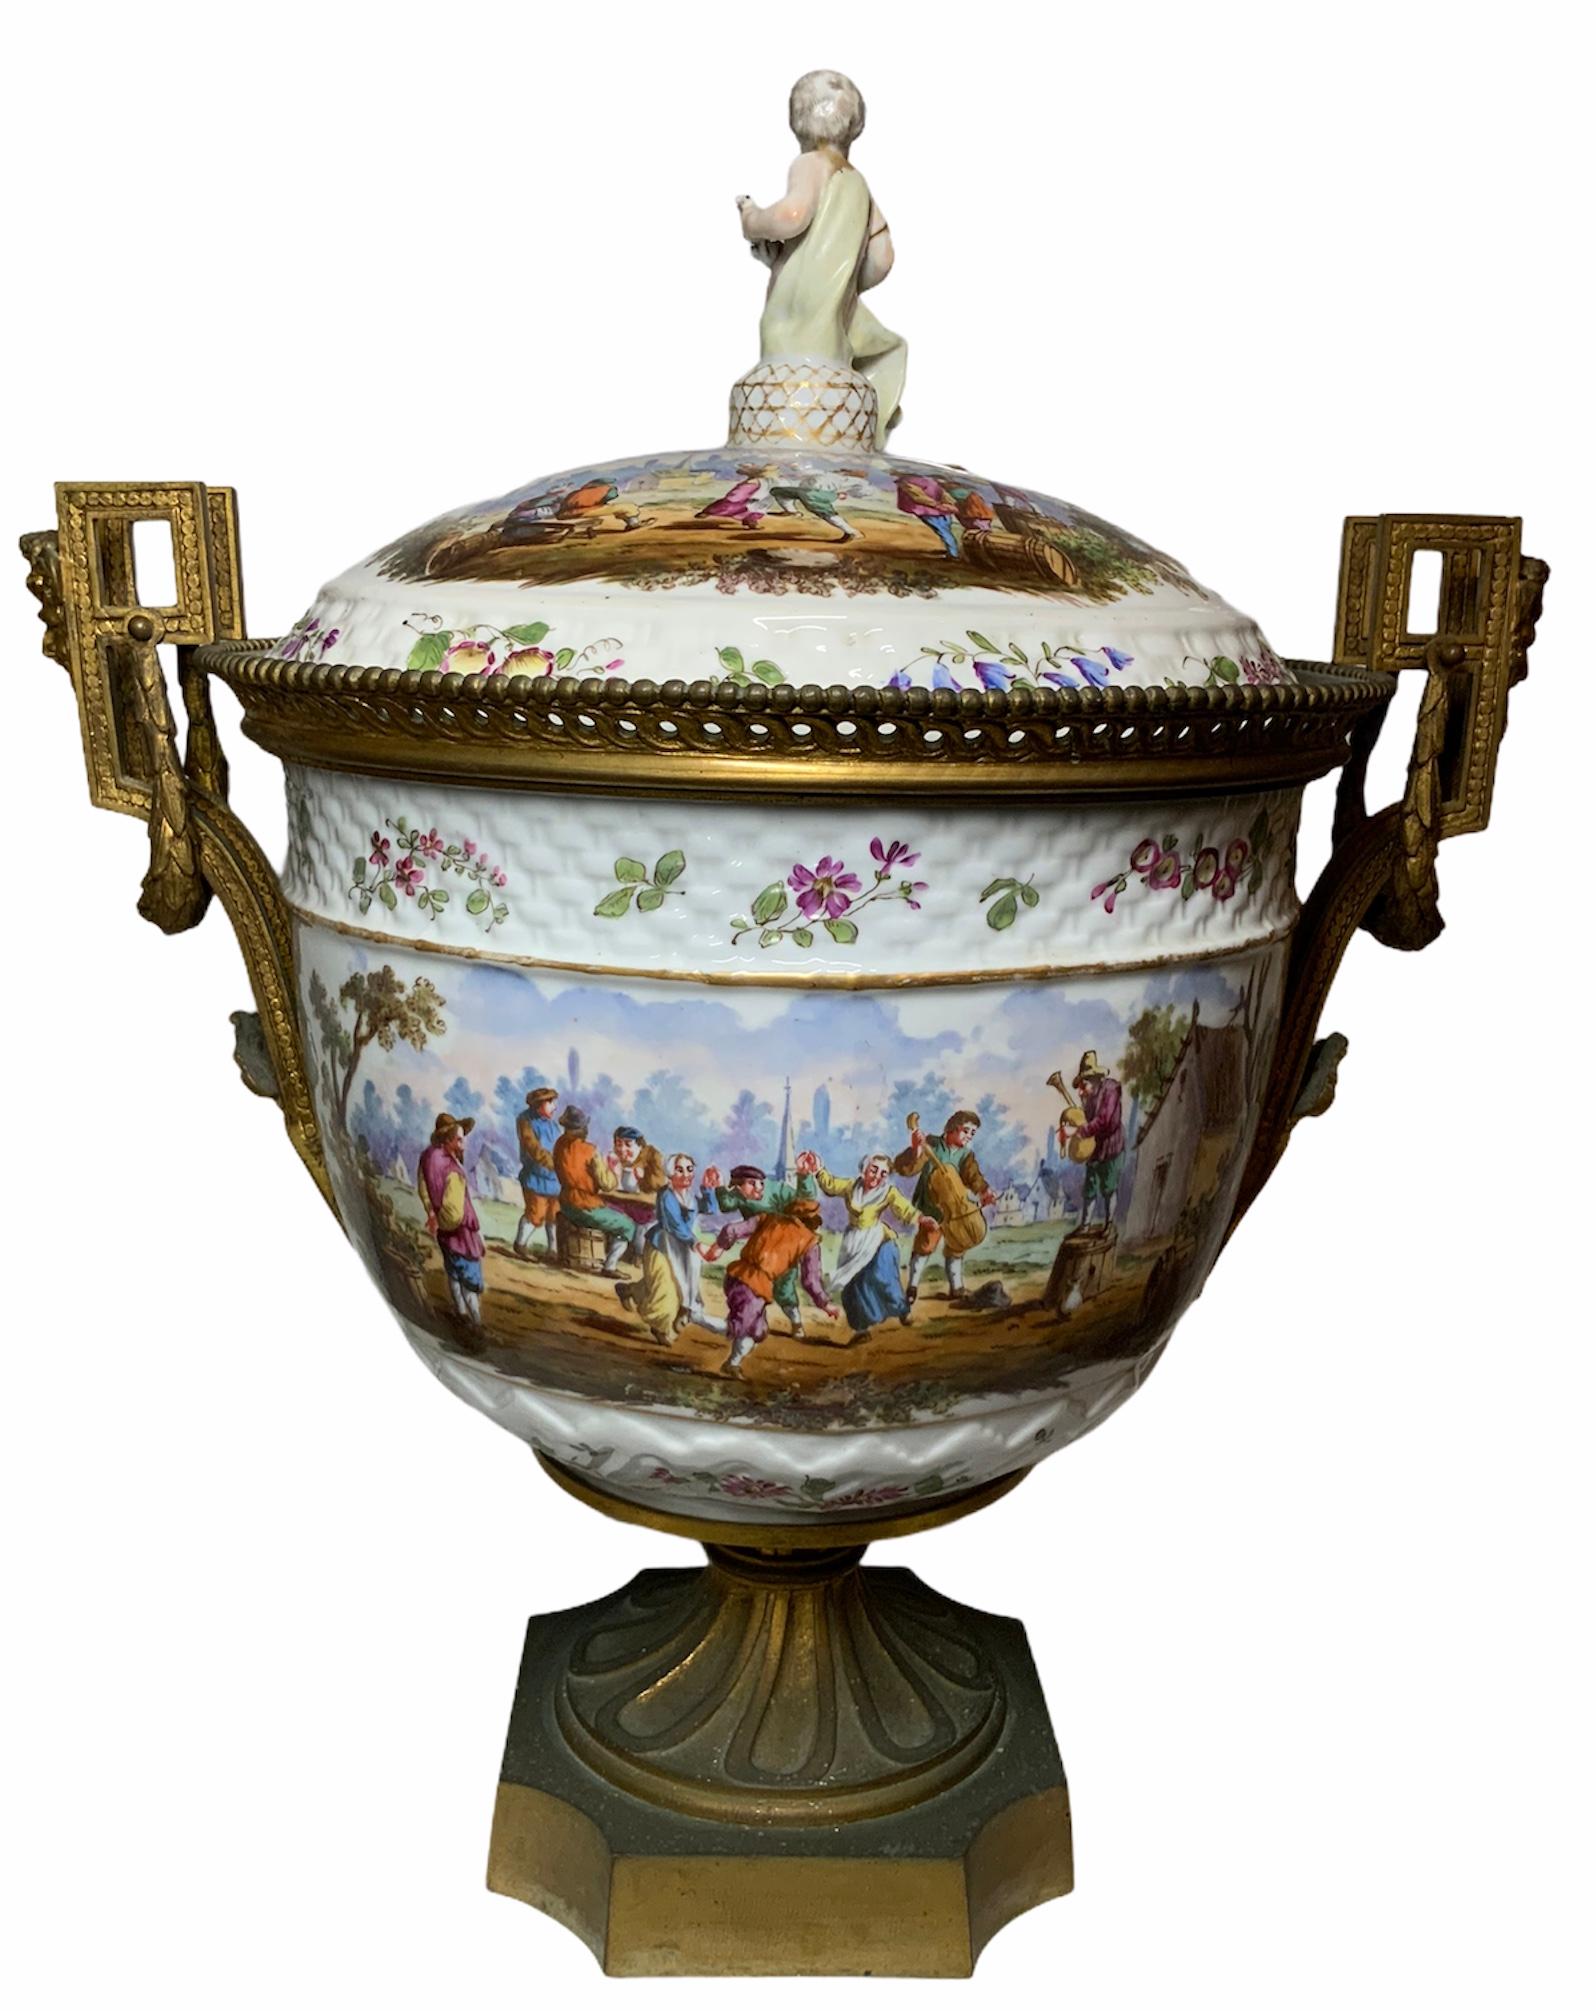 This is a gilt bronze mounted and hand painted porcelain large bowl vase with lid. The hand painted continuous scene shows a town celebration with some peasants dancing & playing some instruments while others are drinking. Around the top & bottom